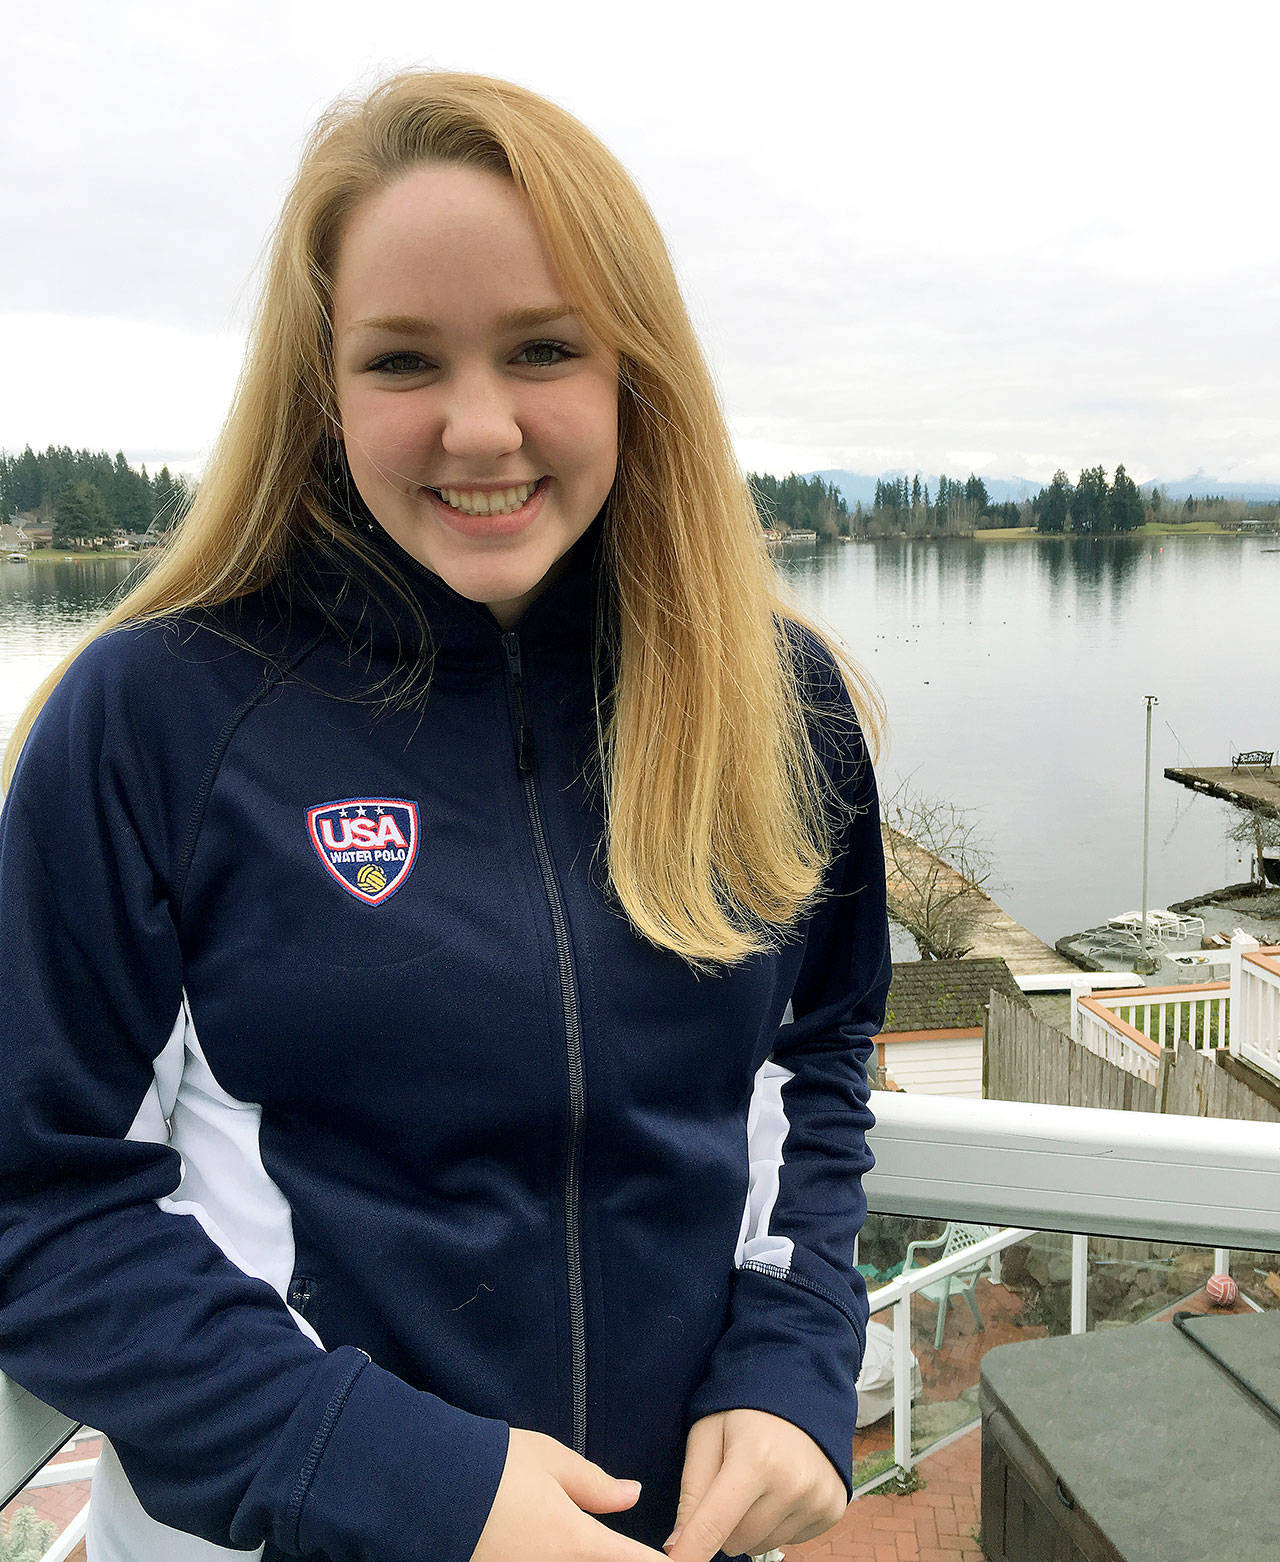 Amelia Portin is a top-goal producer for her high school team, Auburn Mountainview, and leads her touring team, Northwest Water Polo Club. She’s also a member of the Olympic Development Program’s Northwest Zone team and a USA Water Polo Academic All-American. COURTESY PHOTO